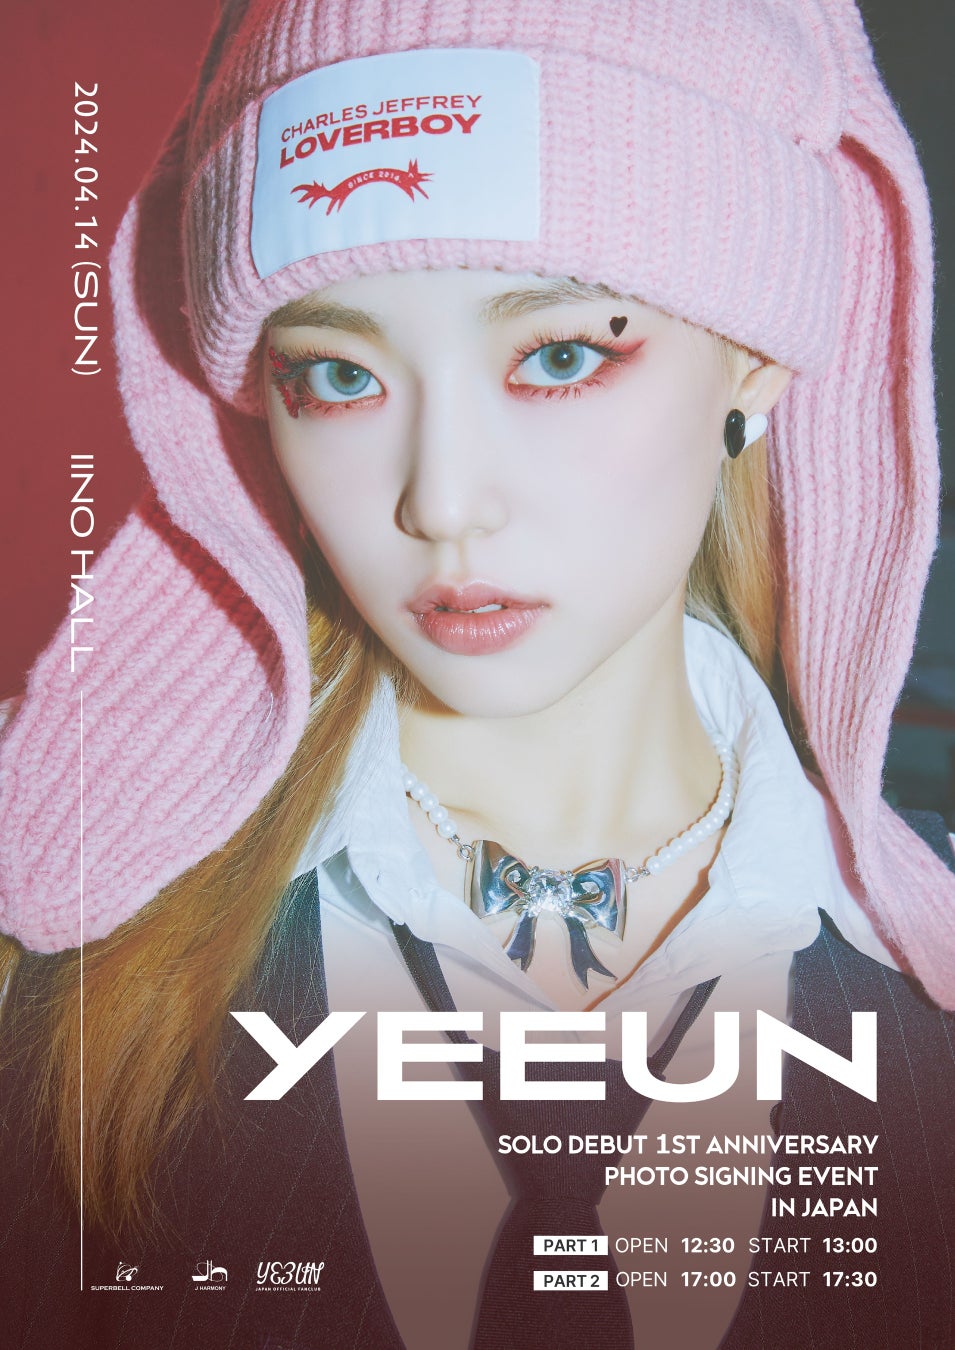 YEEUN Solo Debut 1st Anniversary Photo Signing Event in Japan 開催決定！